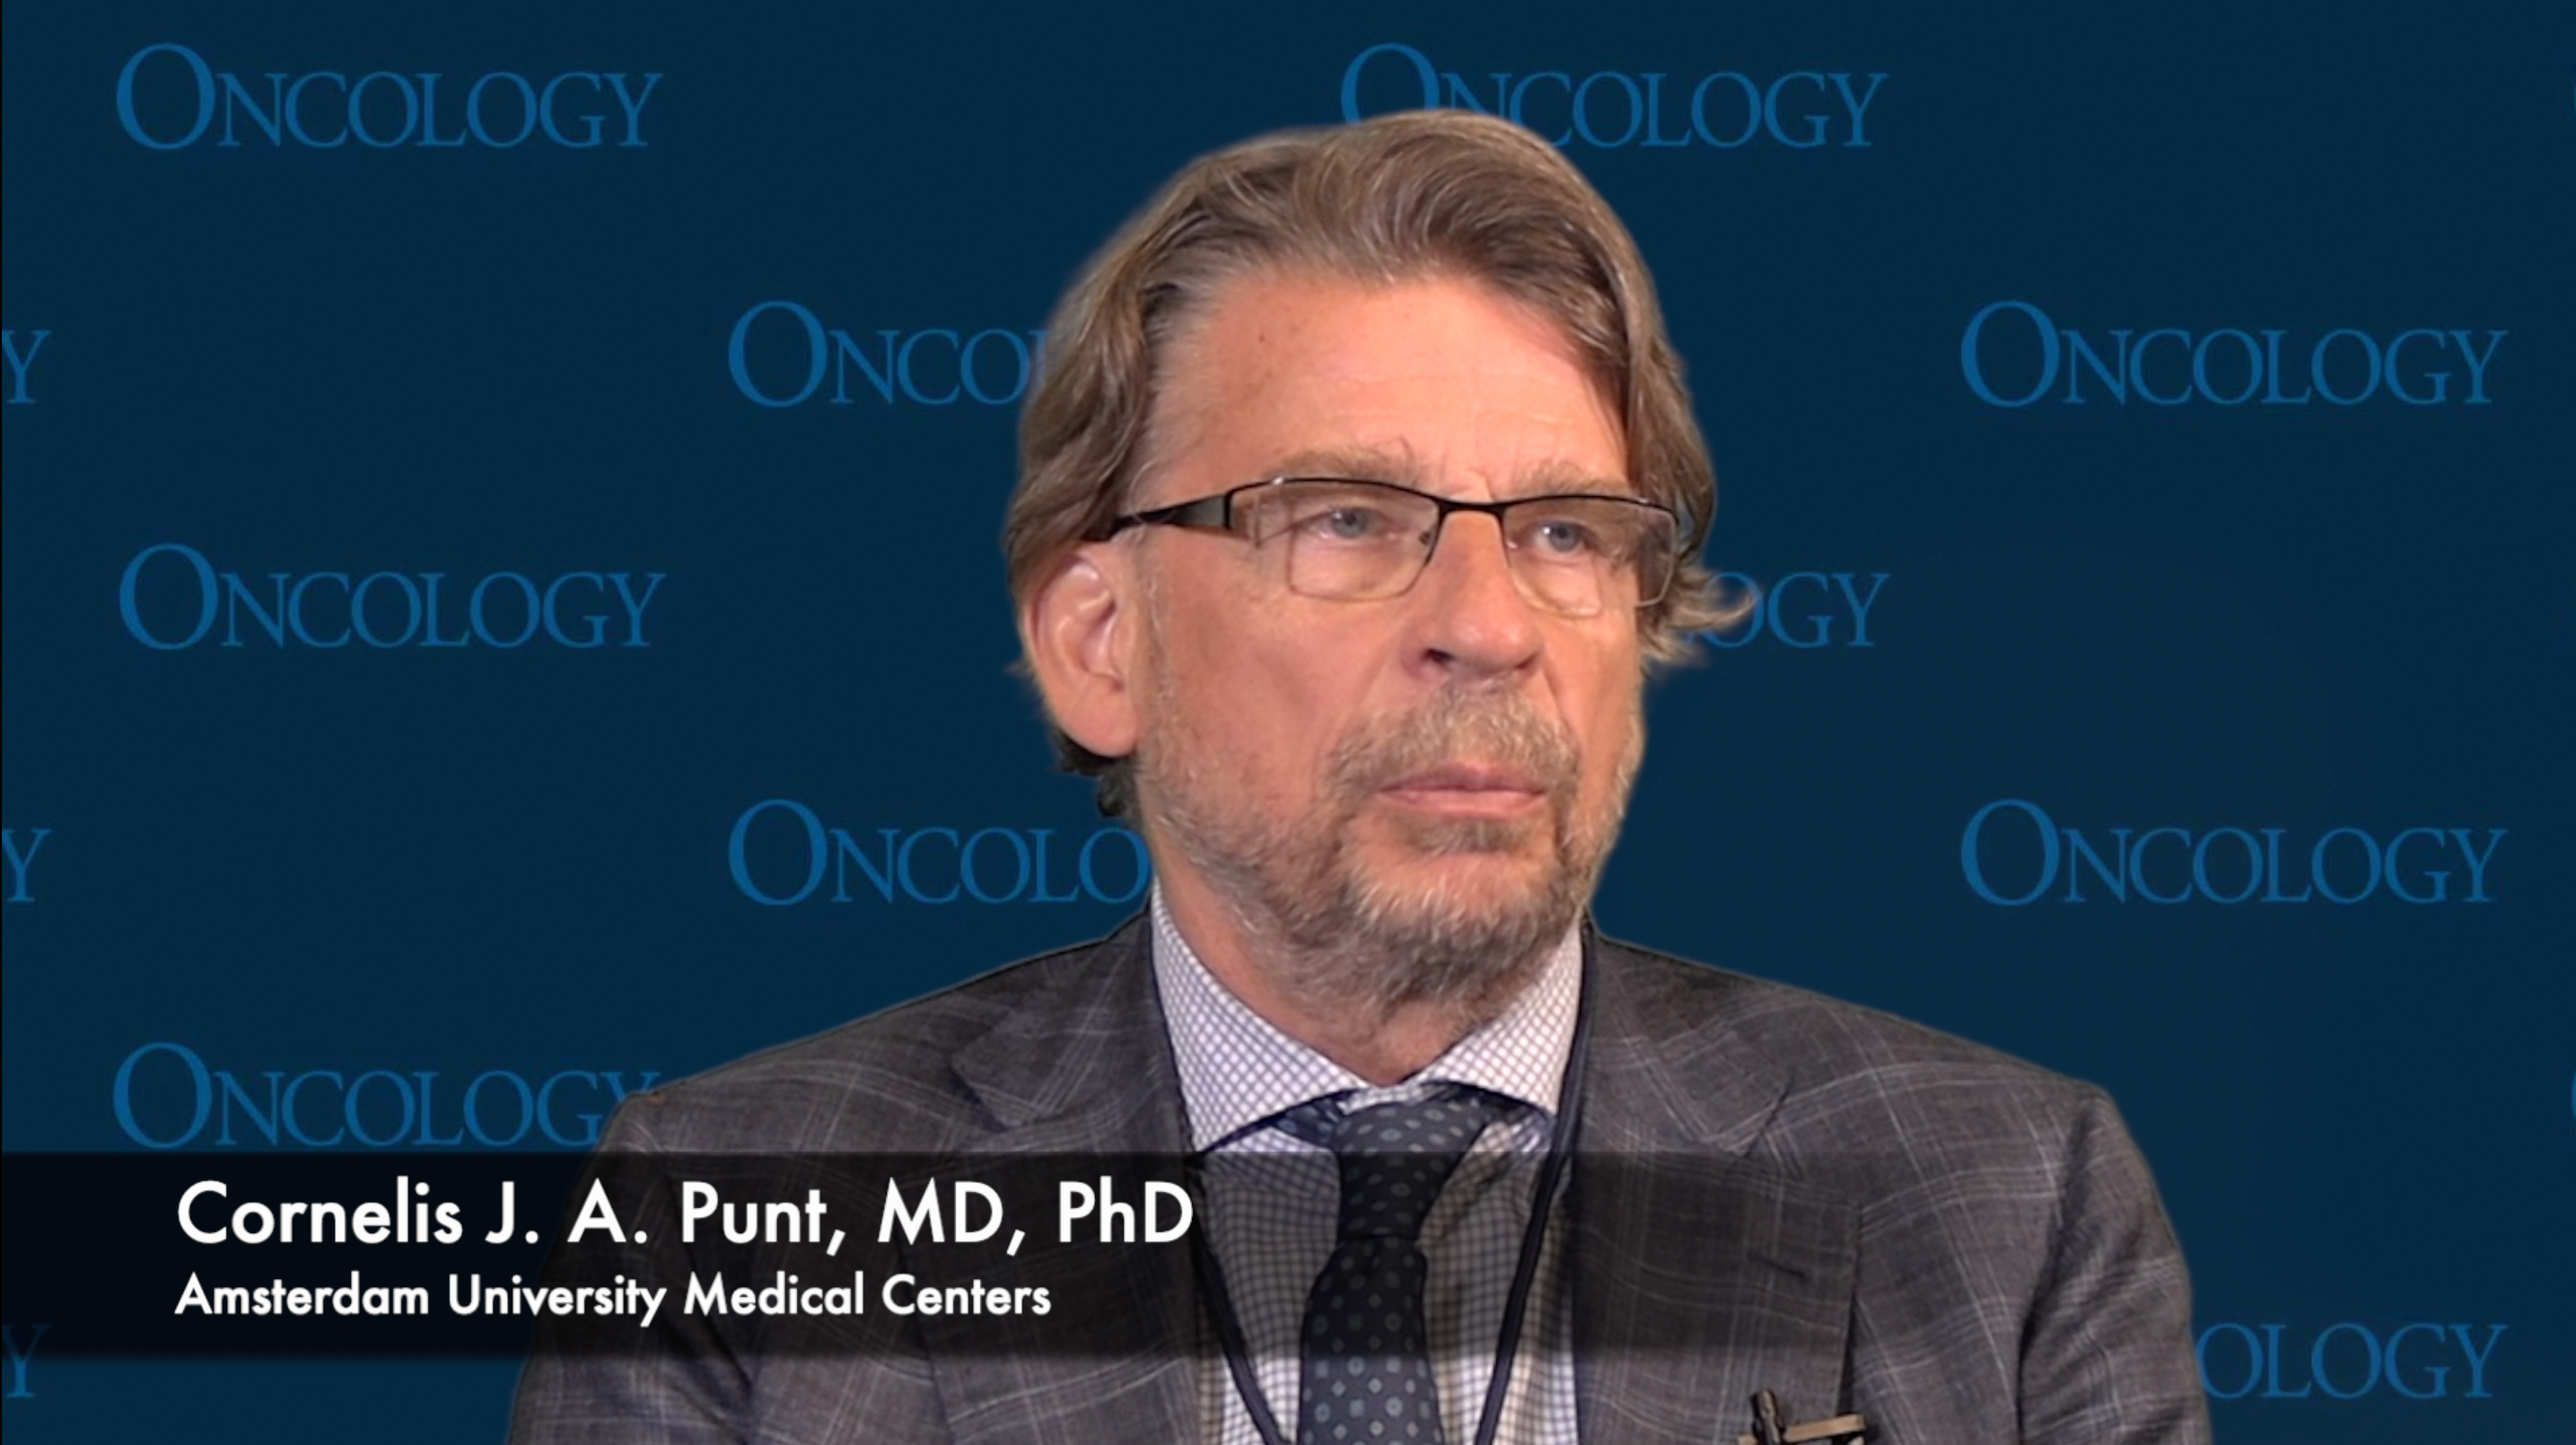 Cornelis J. A. Punt, MD, PhD, Discussed How CAIRO5 Results of Bevacizumab Plus Triplet Chemo for Unresectable CRC Liver Mets Reinforce Use of the Regimen 